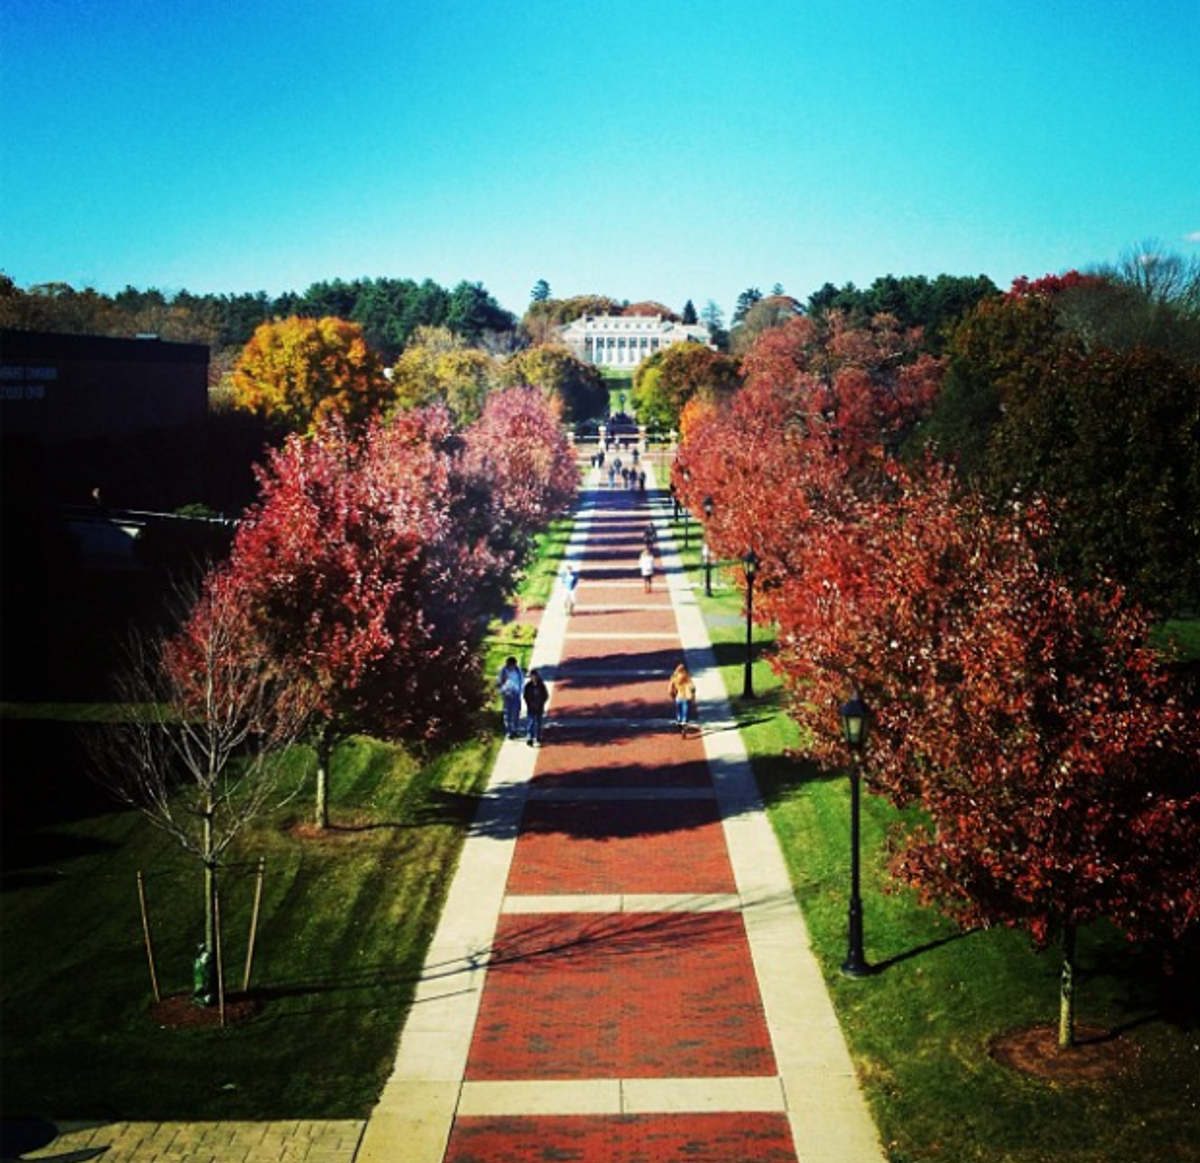 The Best Things About Stonehill During The Fall